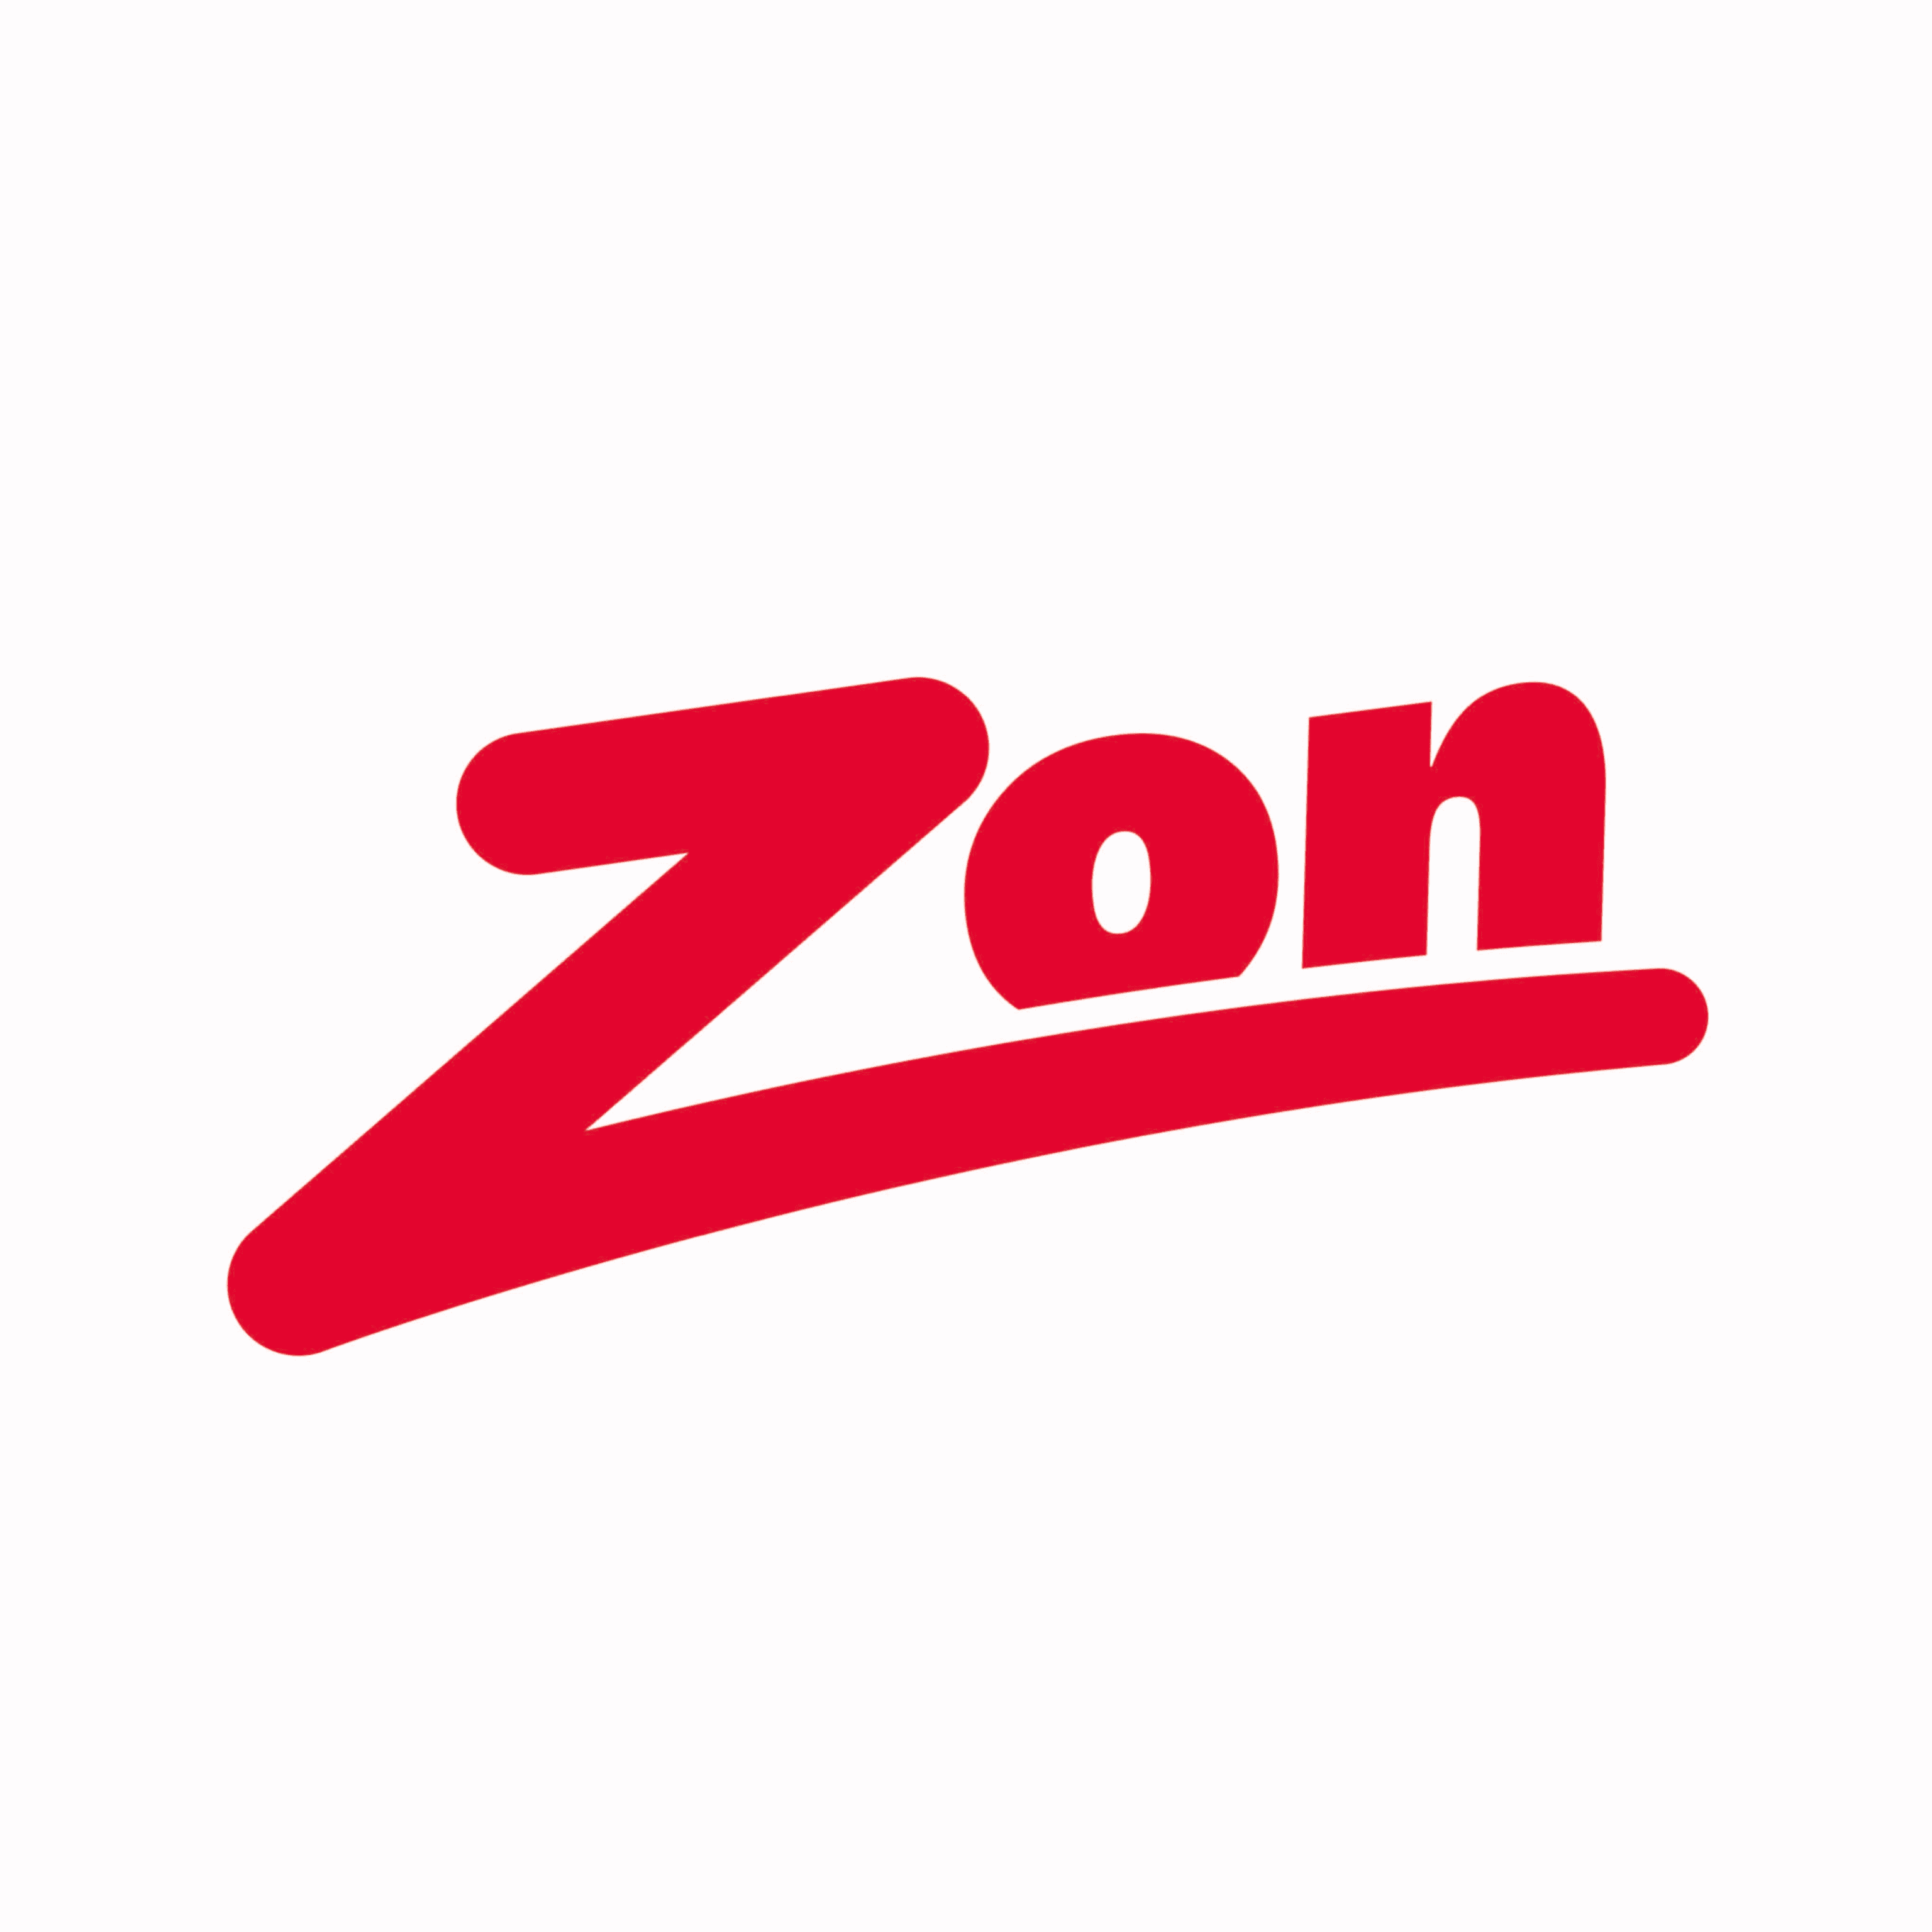 zonproductions